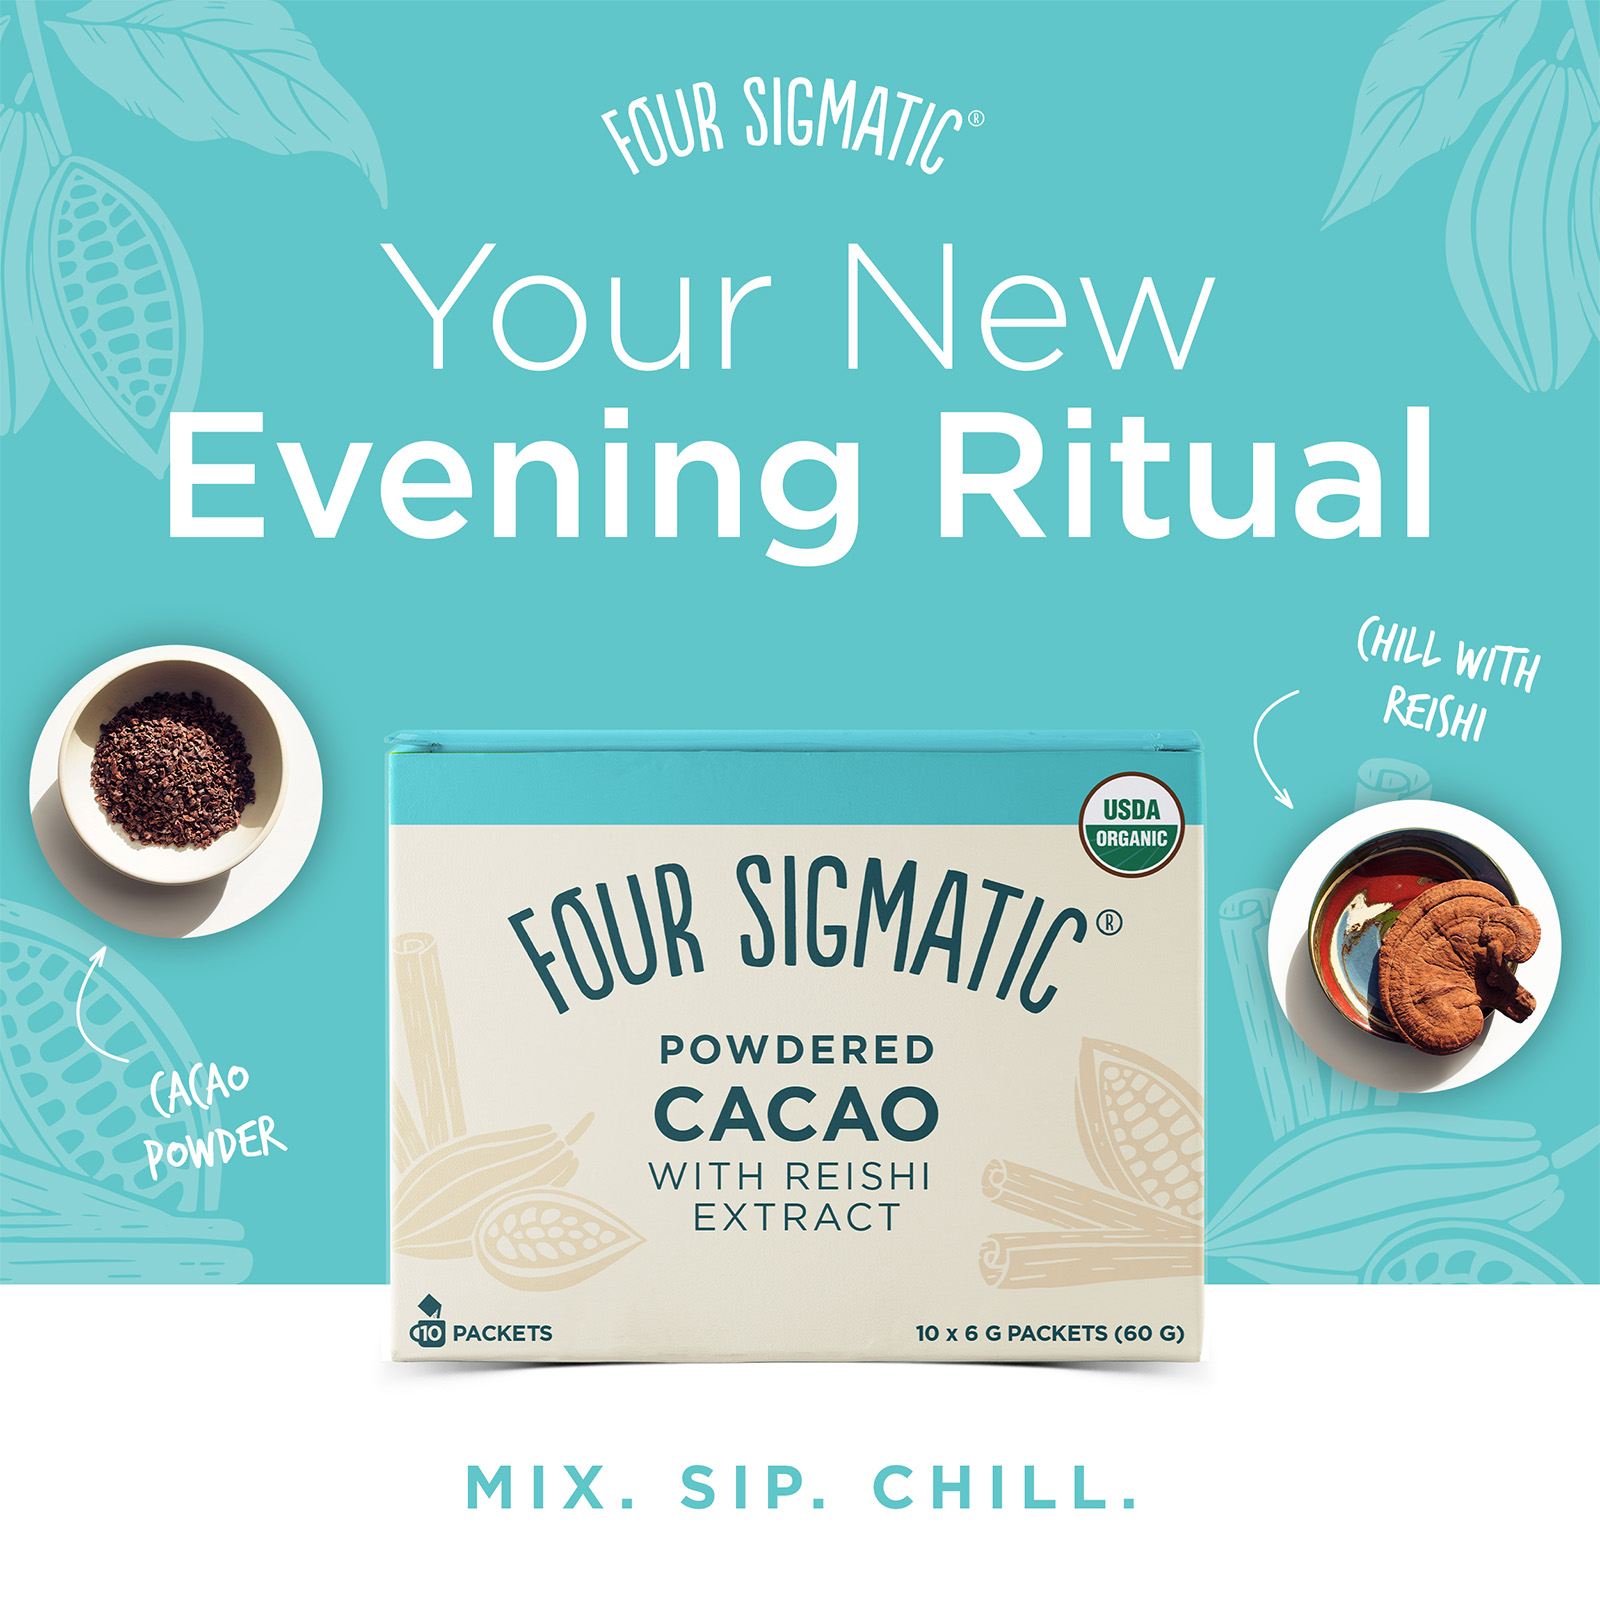 Your new evening ritual, chill with reishi, cacao powder